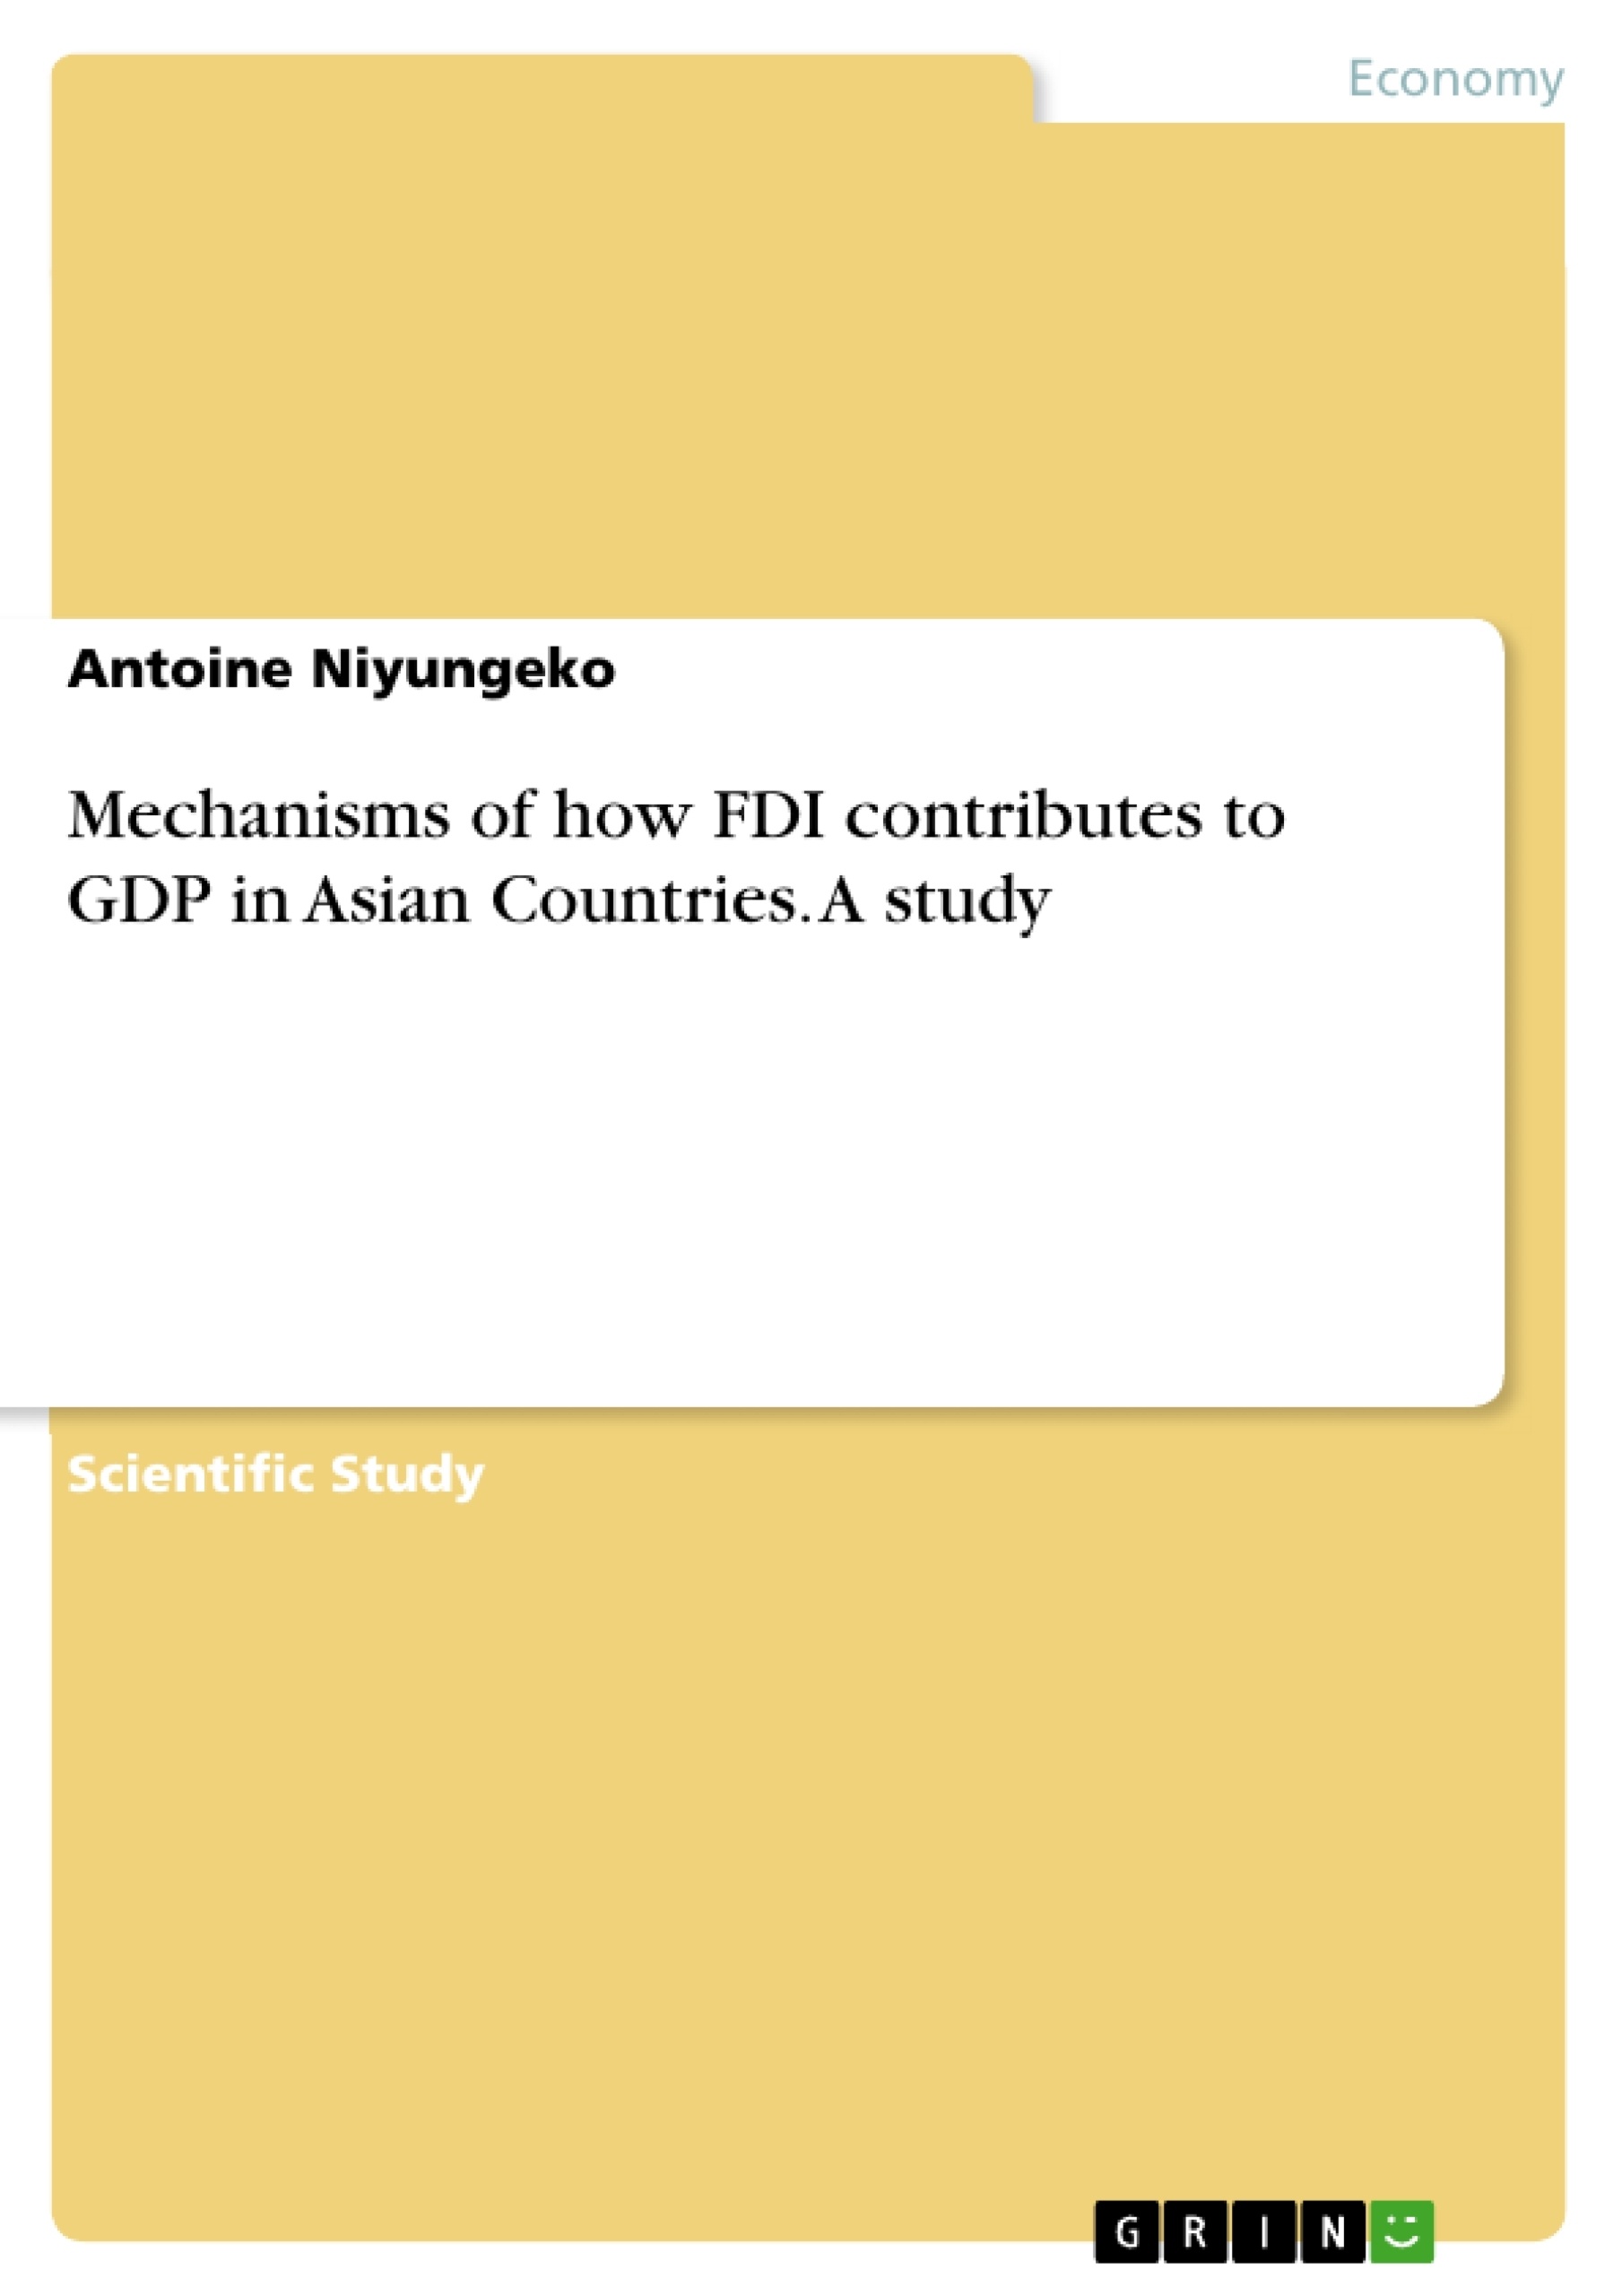 Titel: Mechanisms of how FDI contributes to GDP in Asian Countries. A study